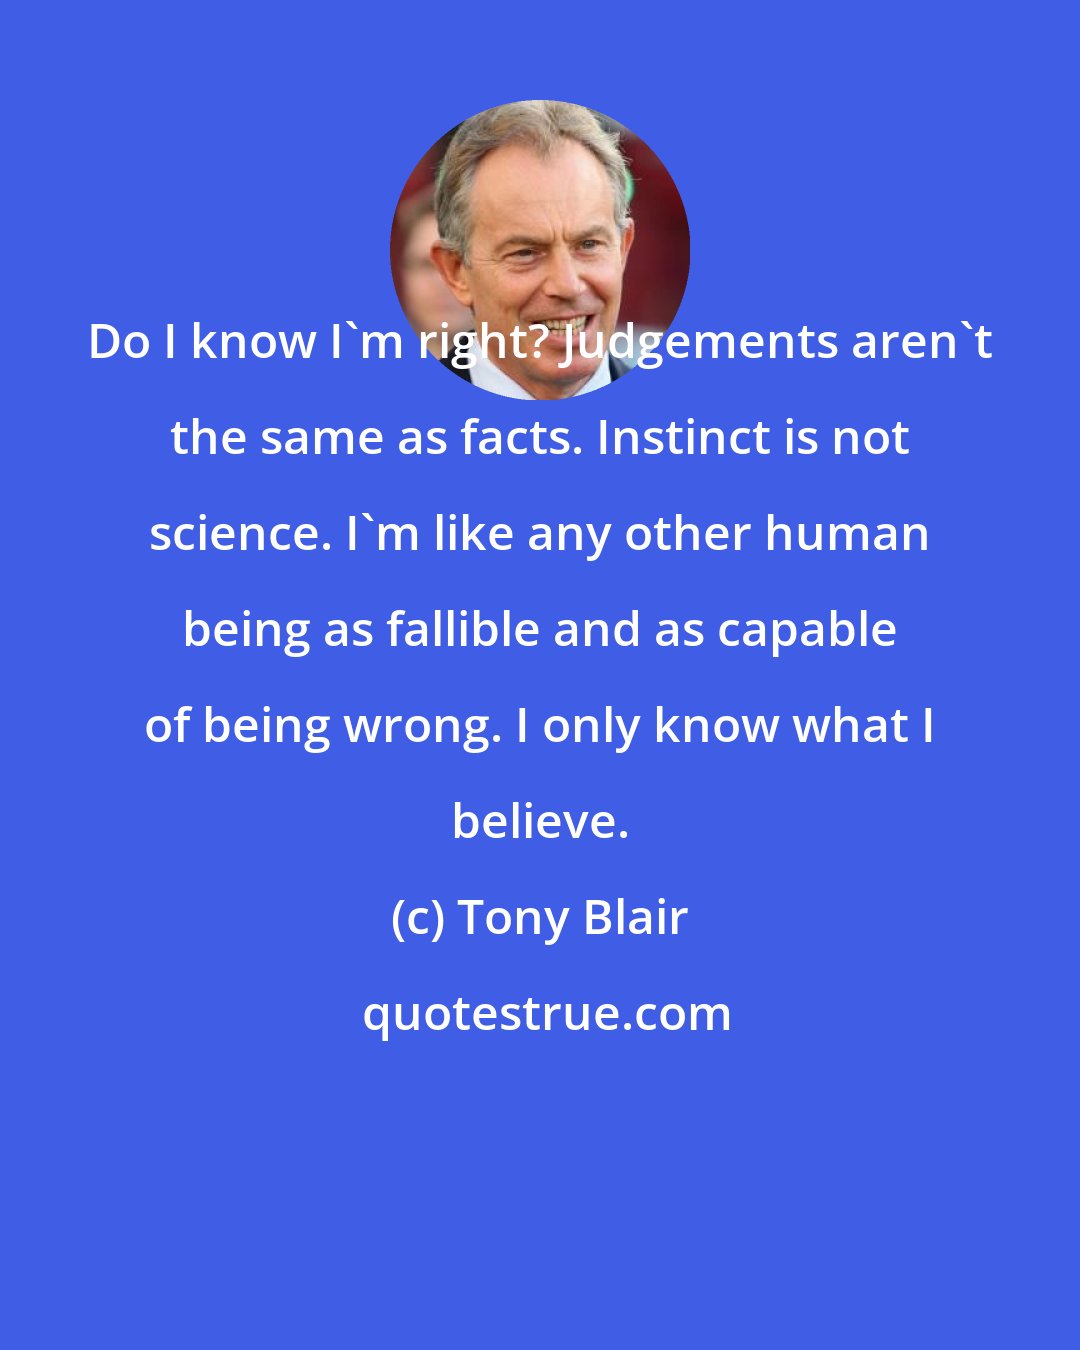 Tony Blair: Do I know I'm right? Judgements aren't the same as facts. Instinct is not science. I'm like any other human being as fallible and as capable of being wrong. I only know what I believe.